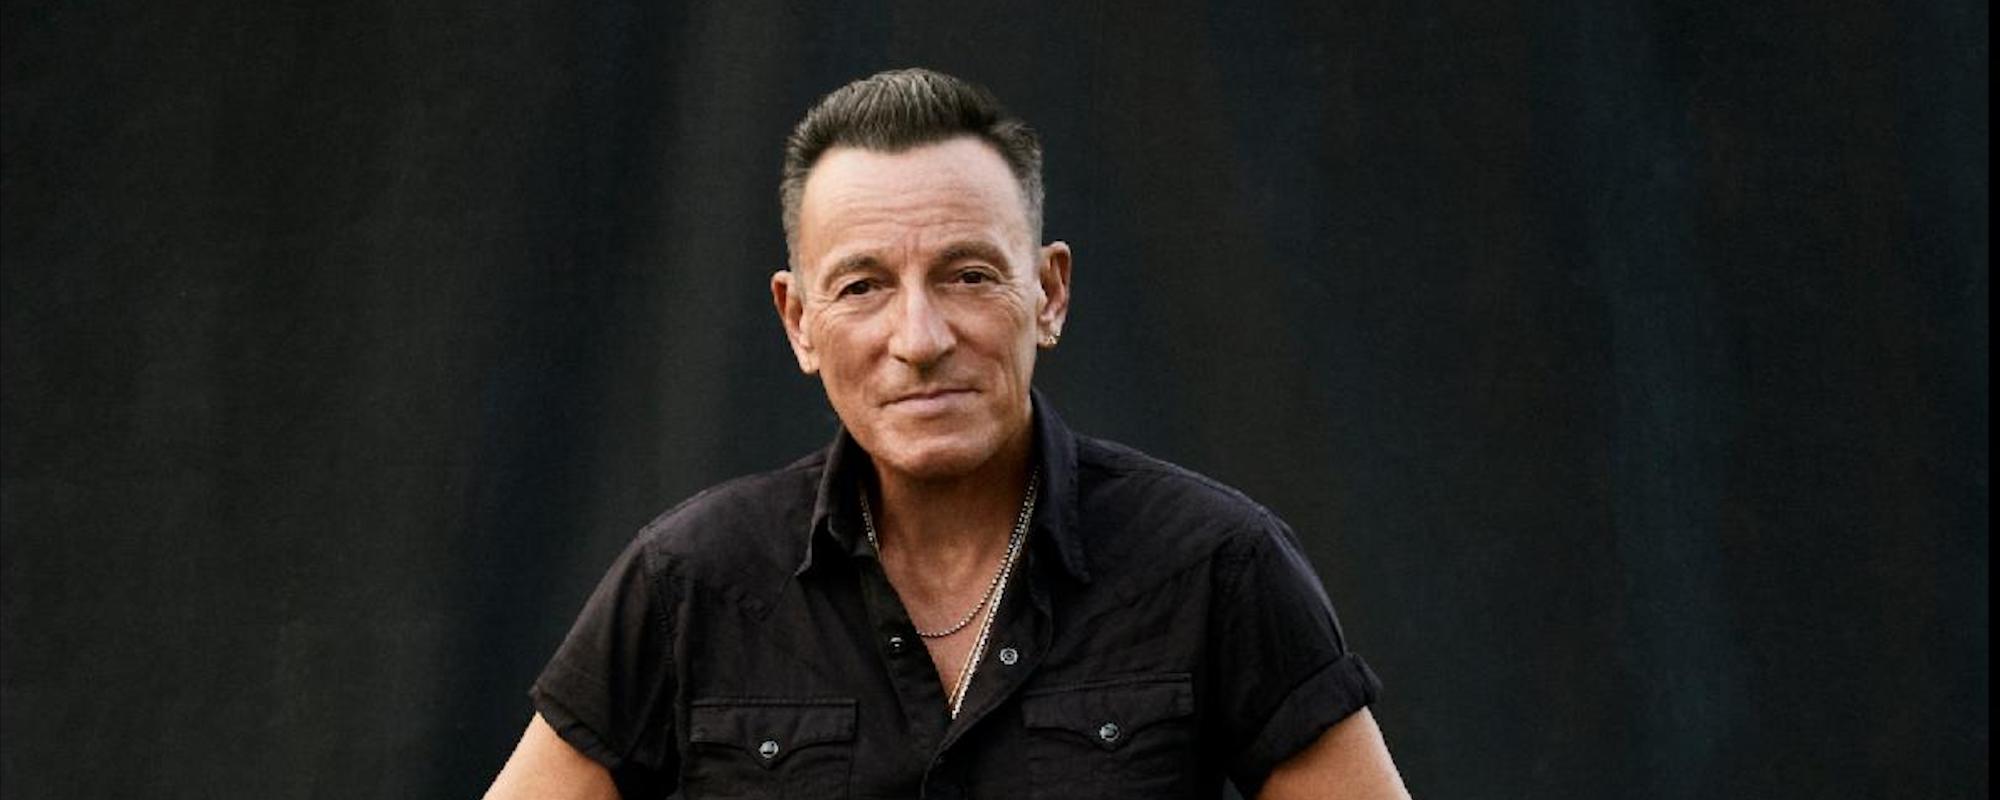 Bruce Springsteen Reveals New Soul Album ‘Only the Strong Survive,’ Rendition of a Frank Wilson Classic